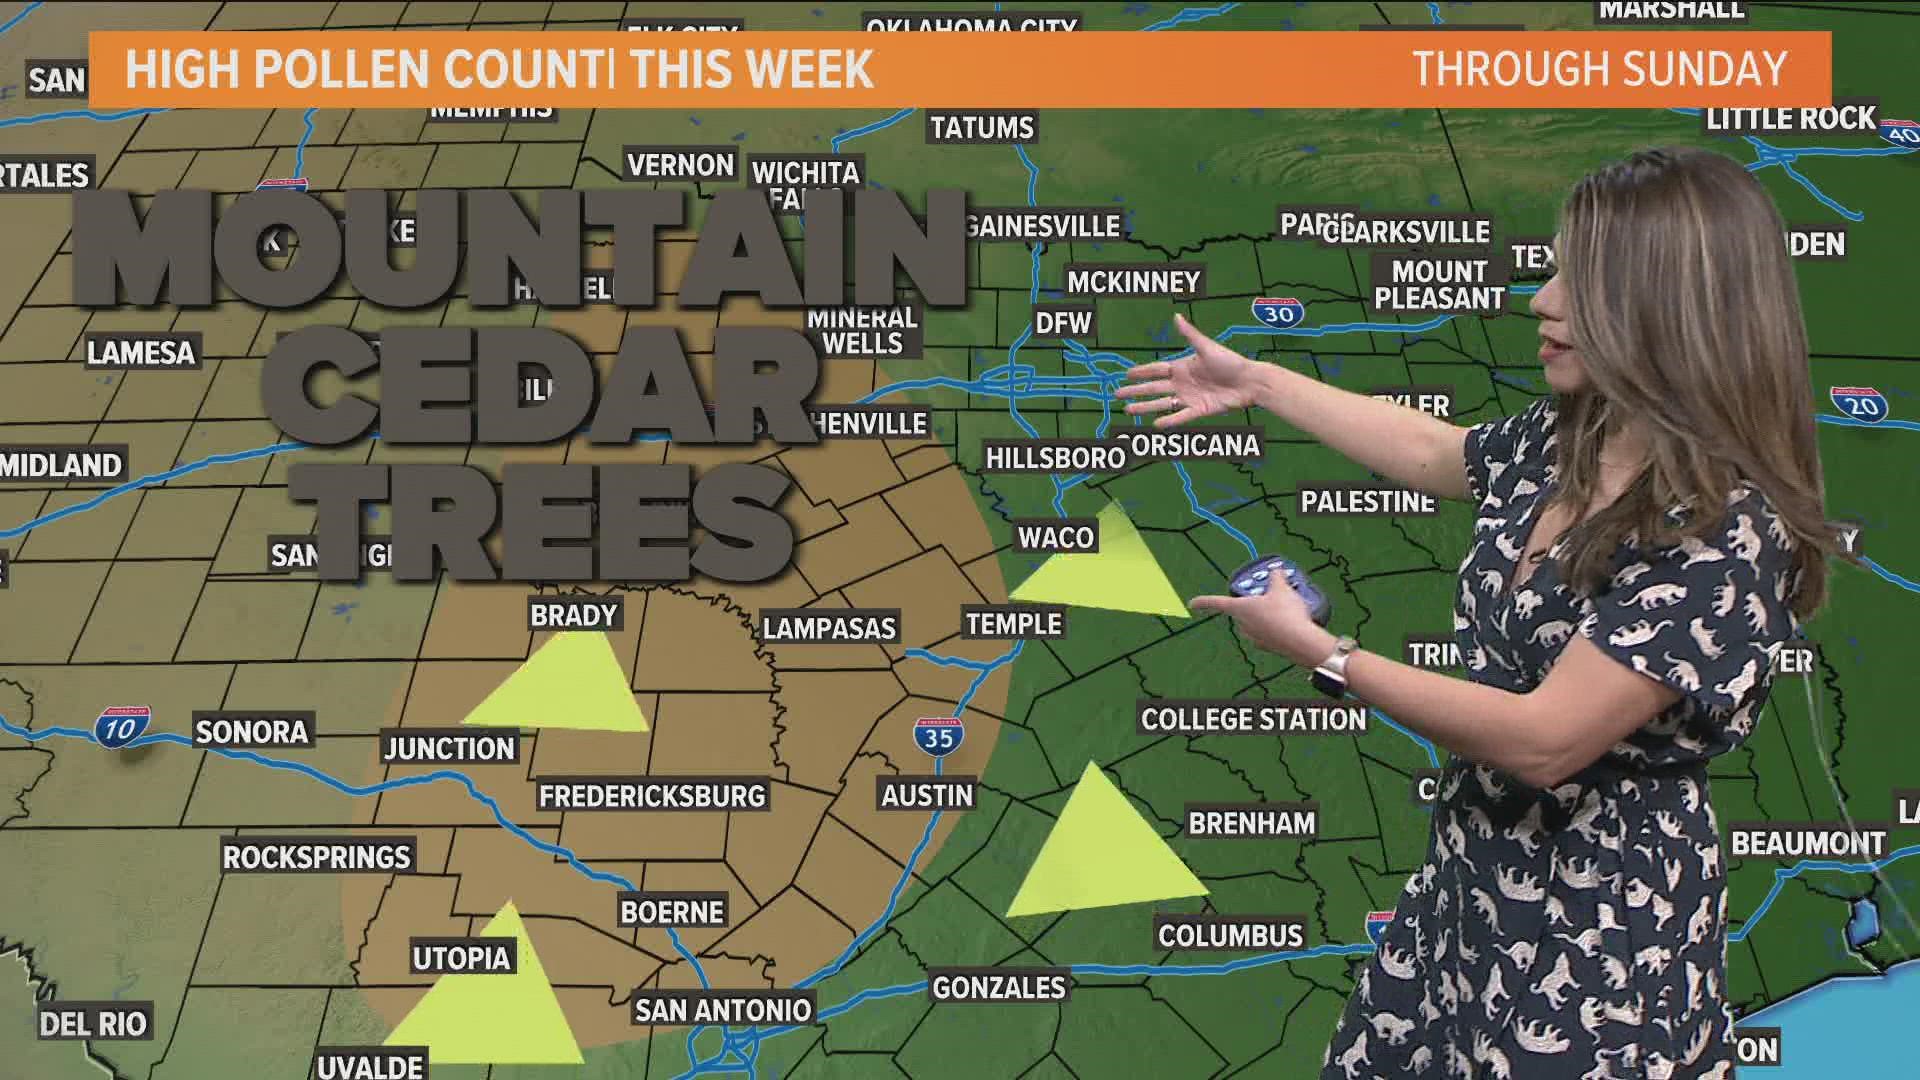 Fortunately, we do have some rain in the forecast that could settle down the pollen in North Texas.